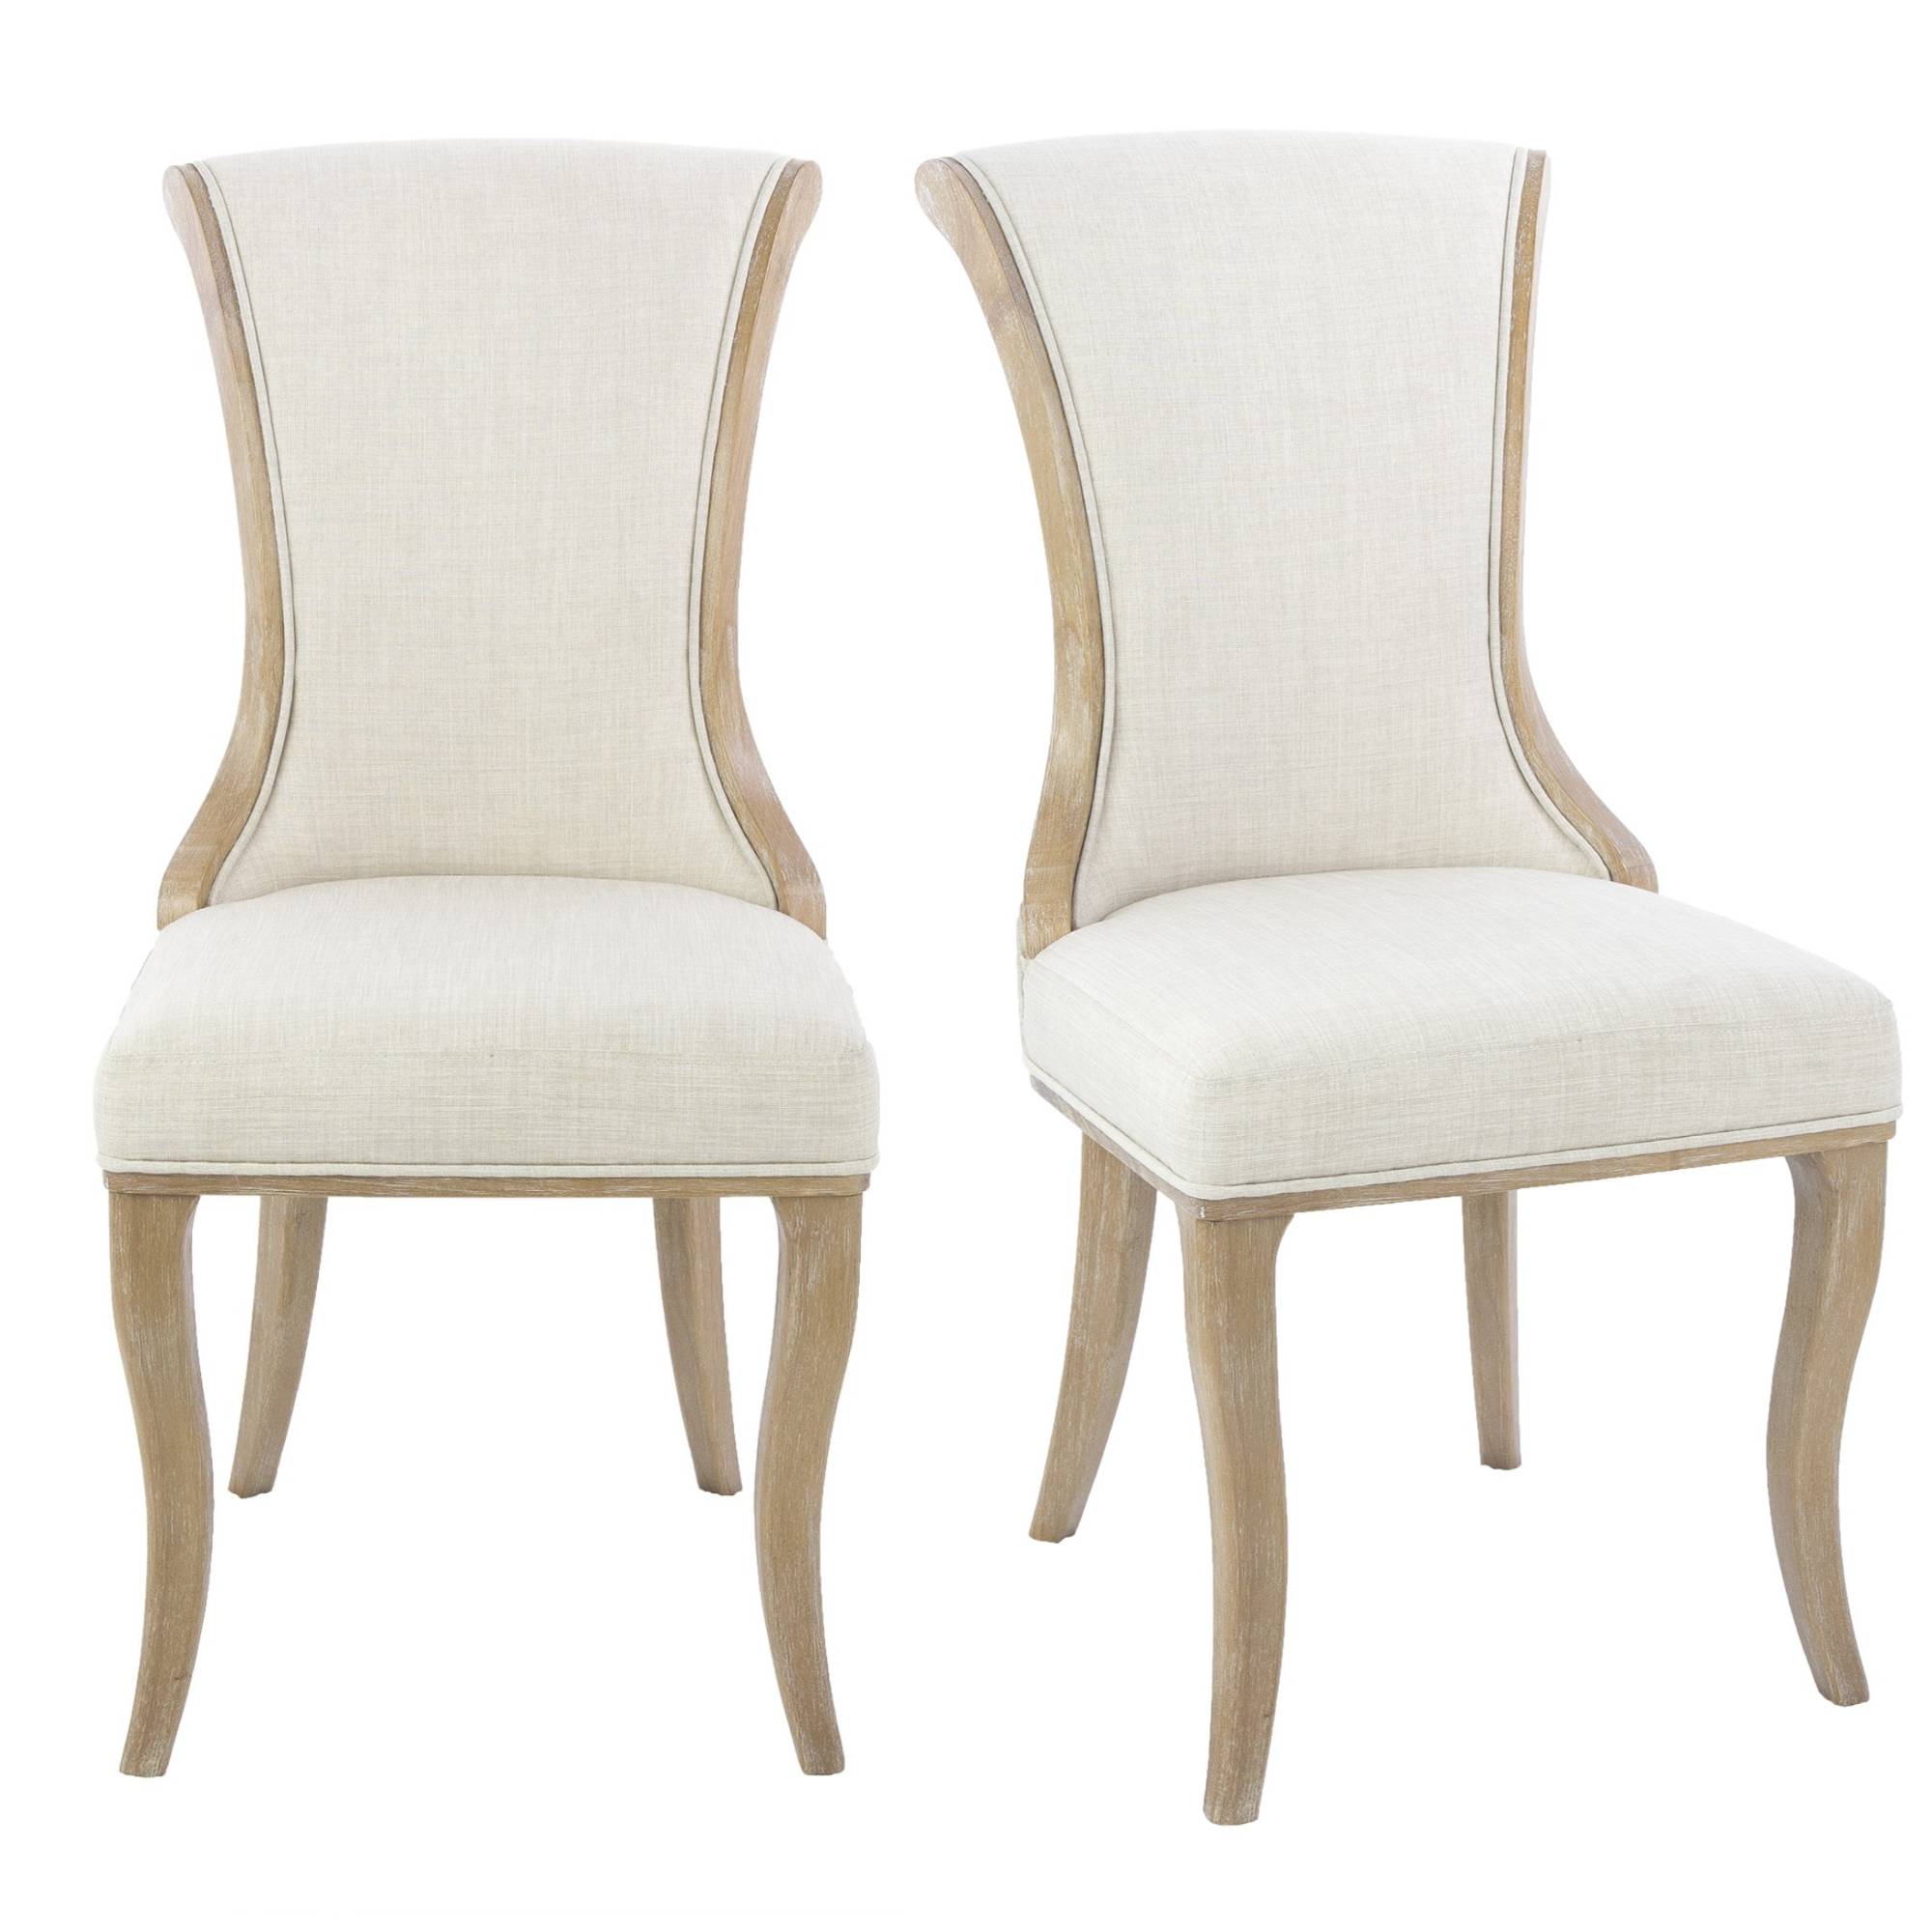 Set of 2 Updated Rustic White Linen Wood Frame Dining Chairs